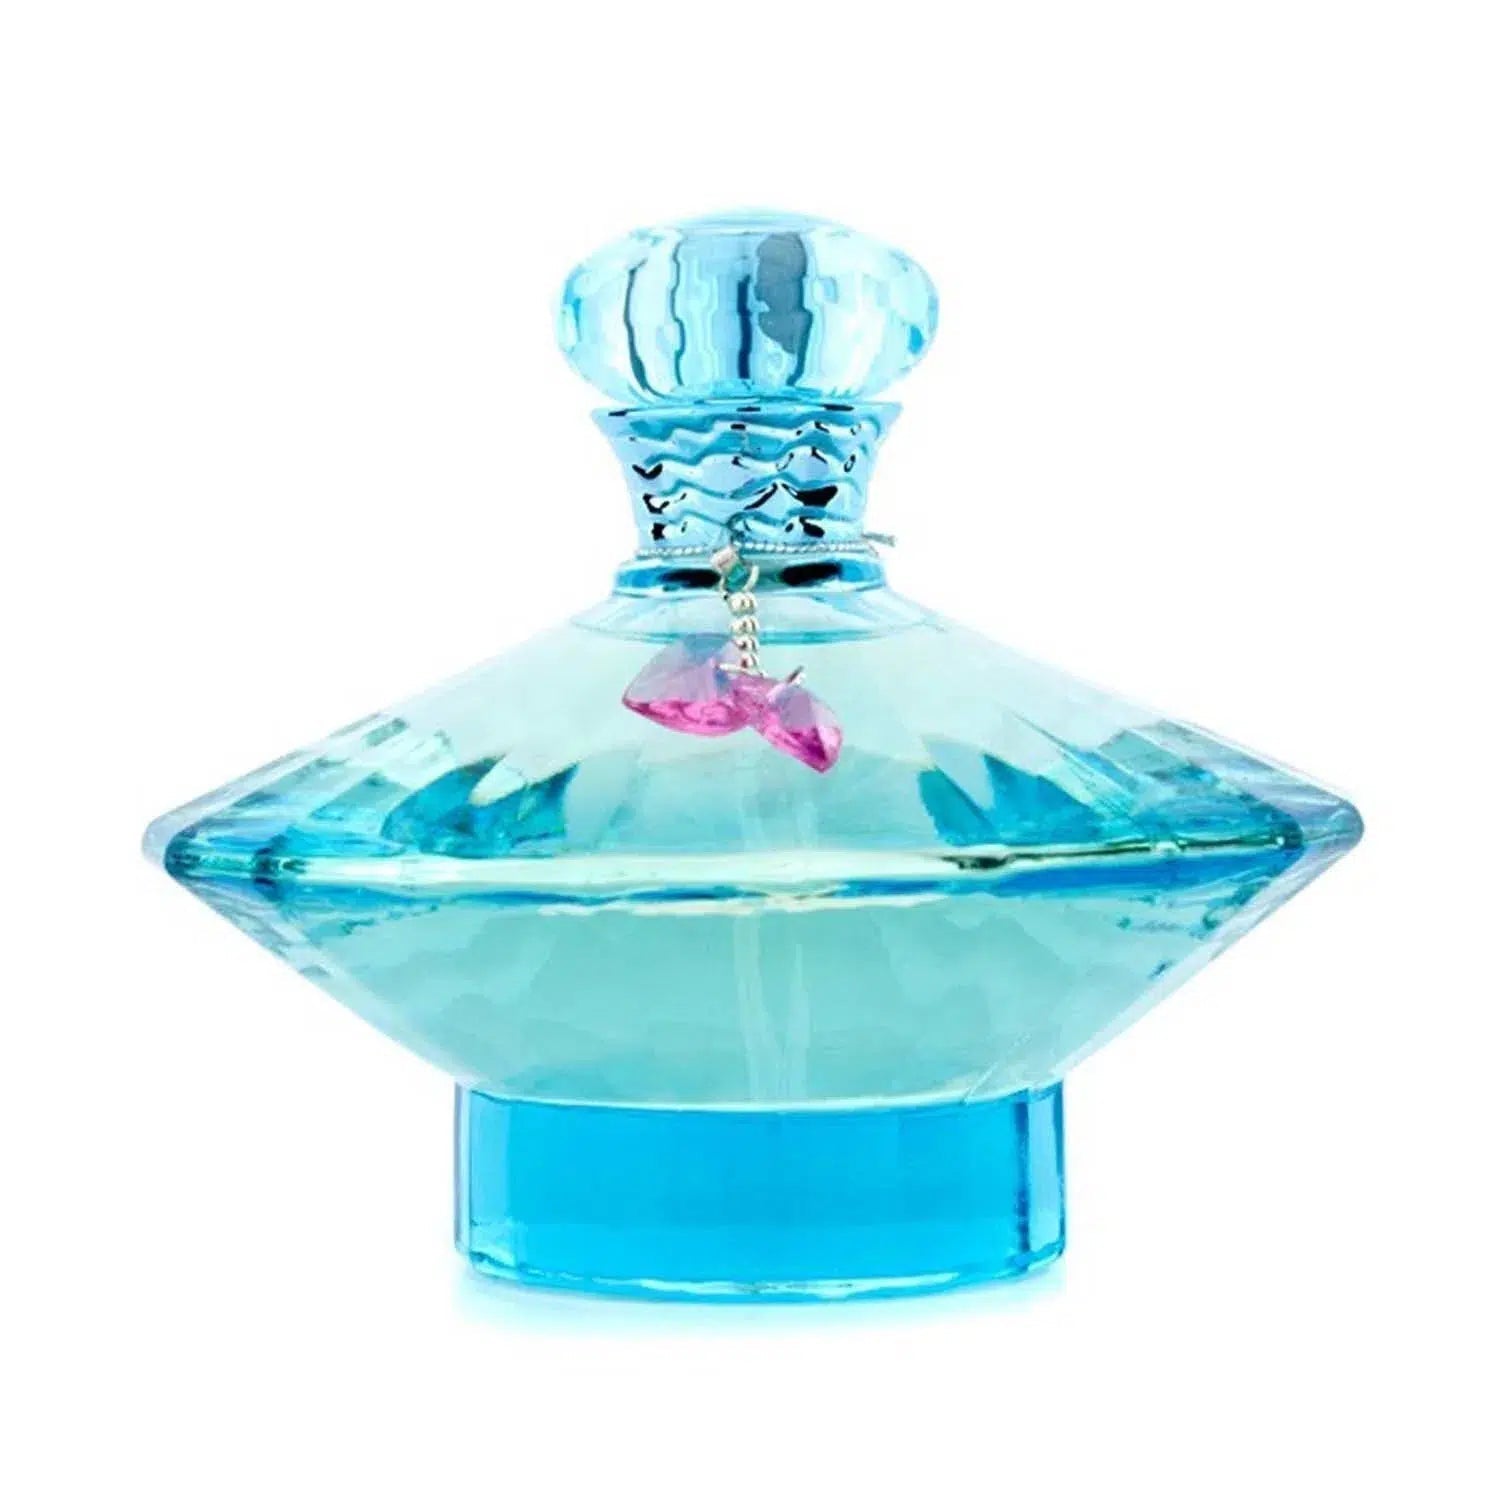 Curious by Britney Spears 100ml